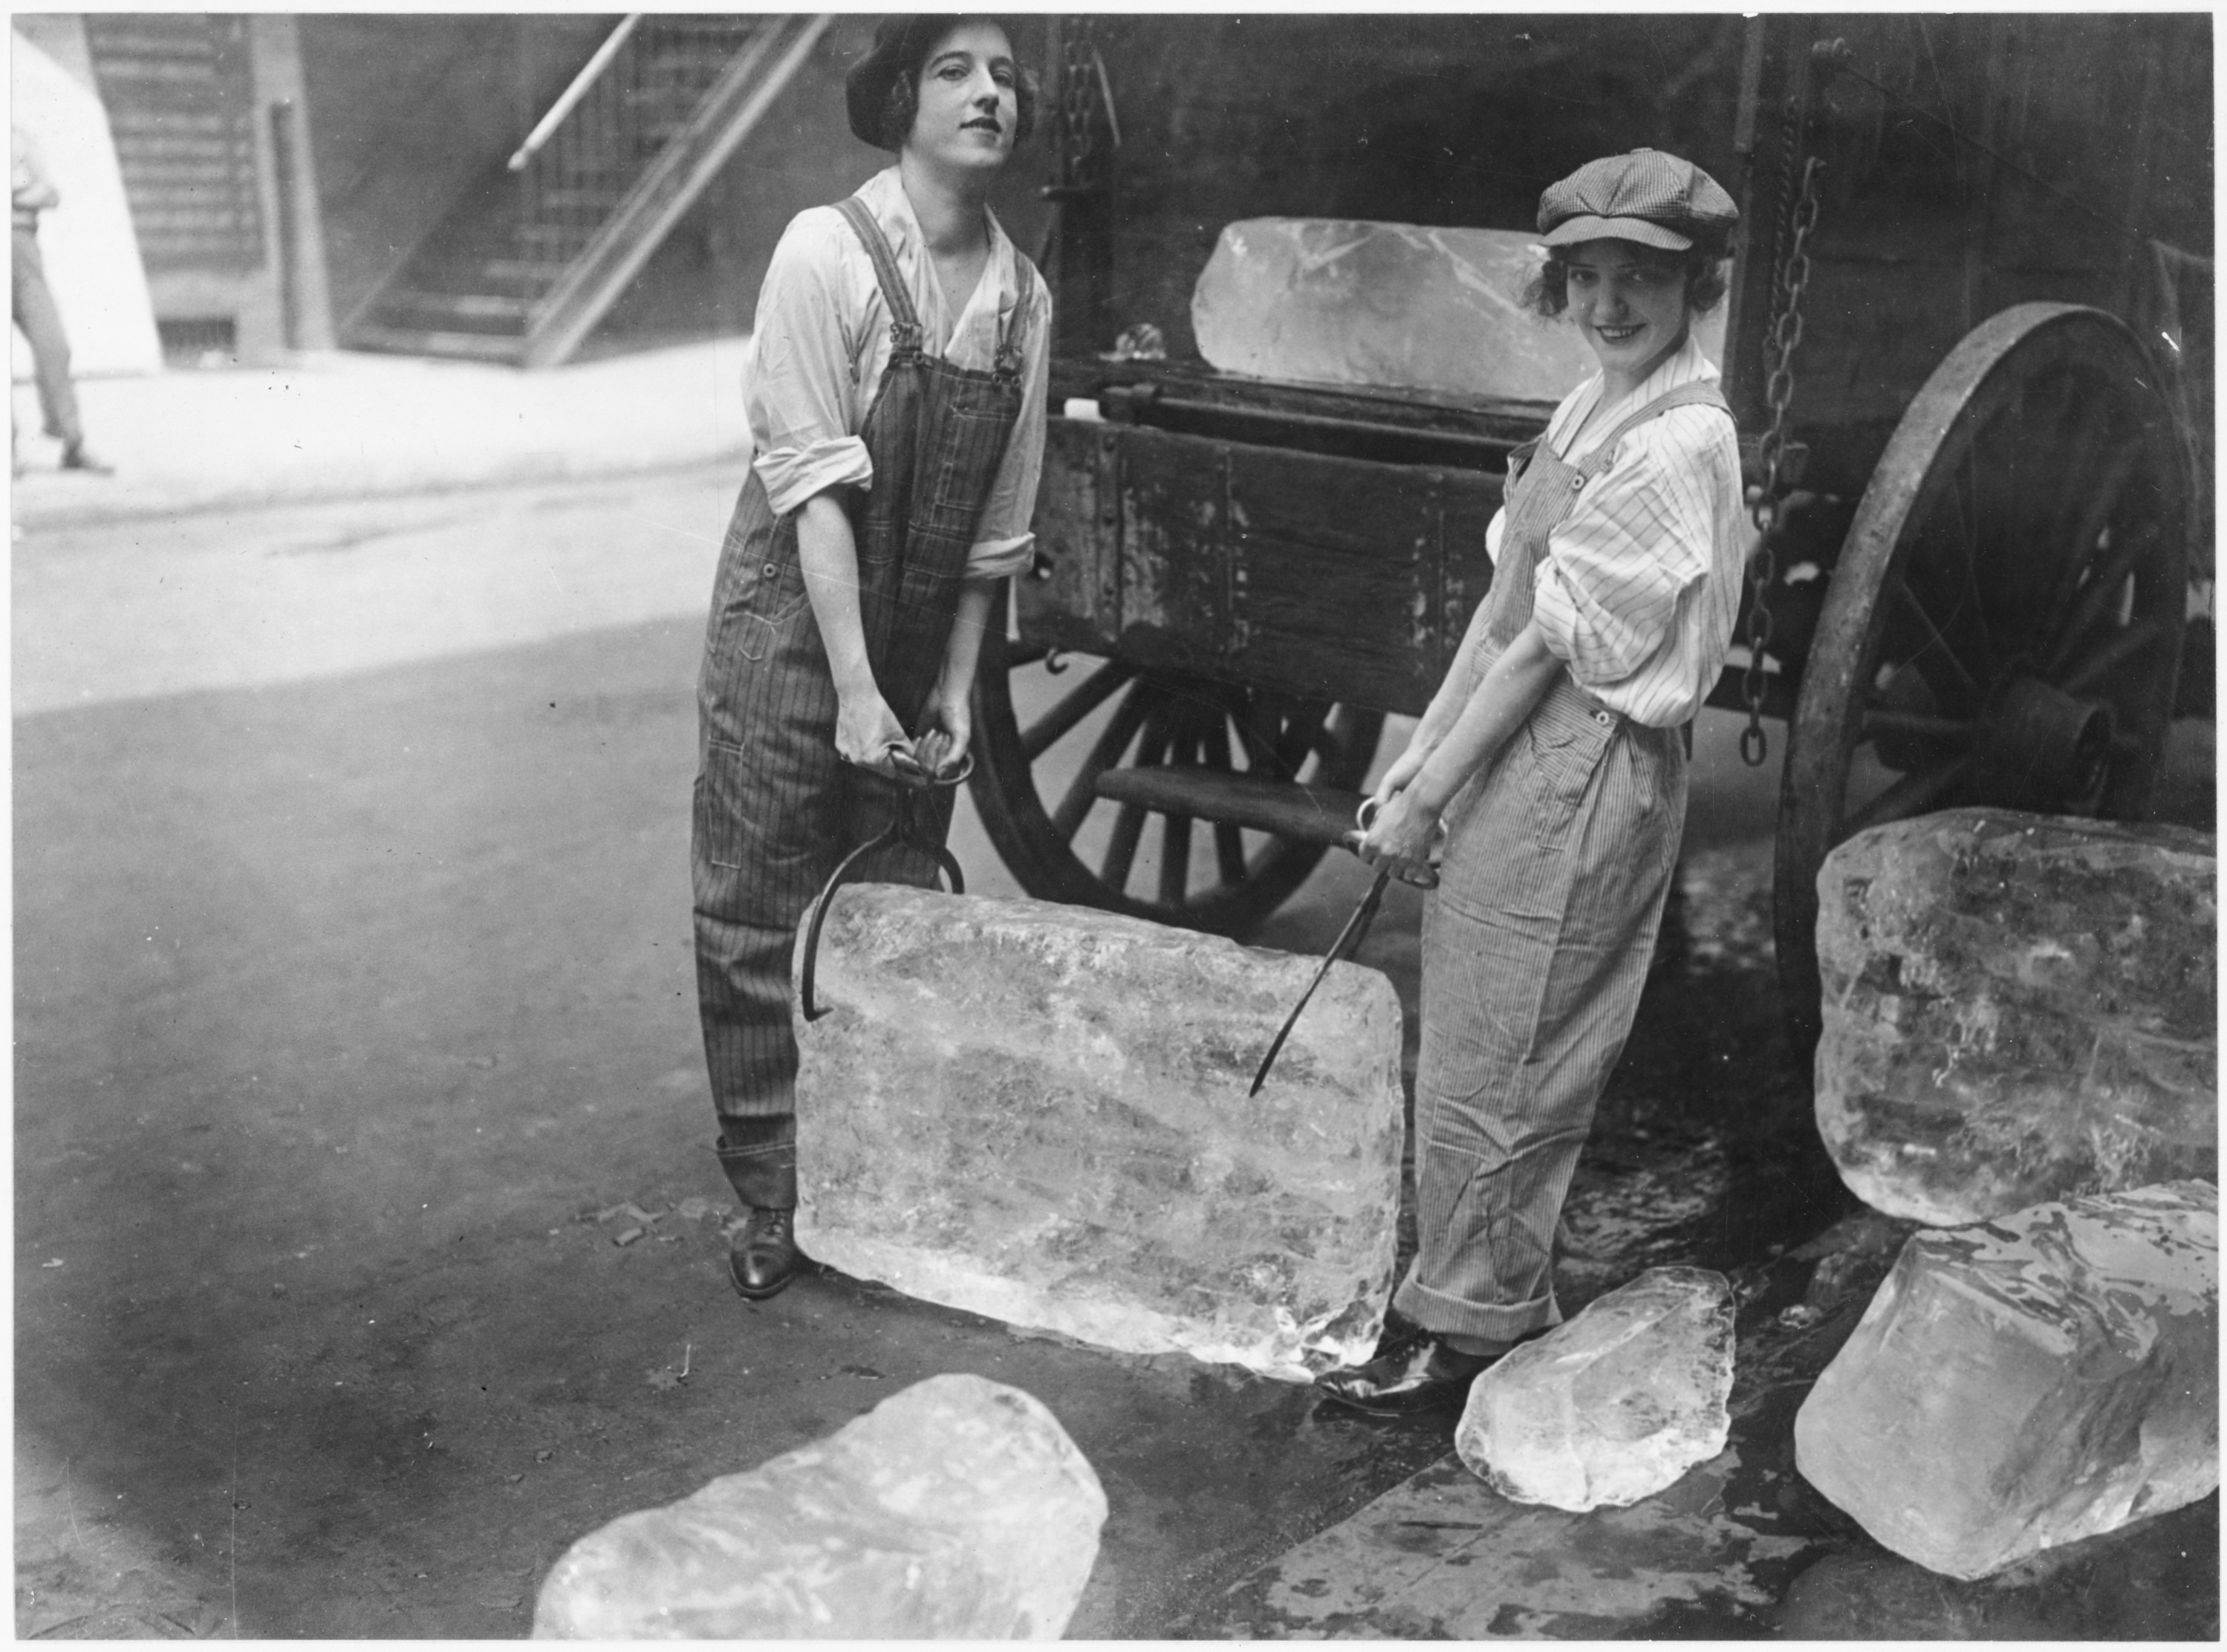 Girls deliver ice. Heavy work that formerly belonged to men began being done by women. The ice girls are delivering ice on a route and their work requires brawn as well as the patriotic ambition to help. 16th of September, 1918